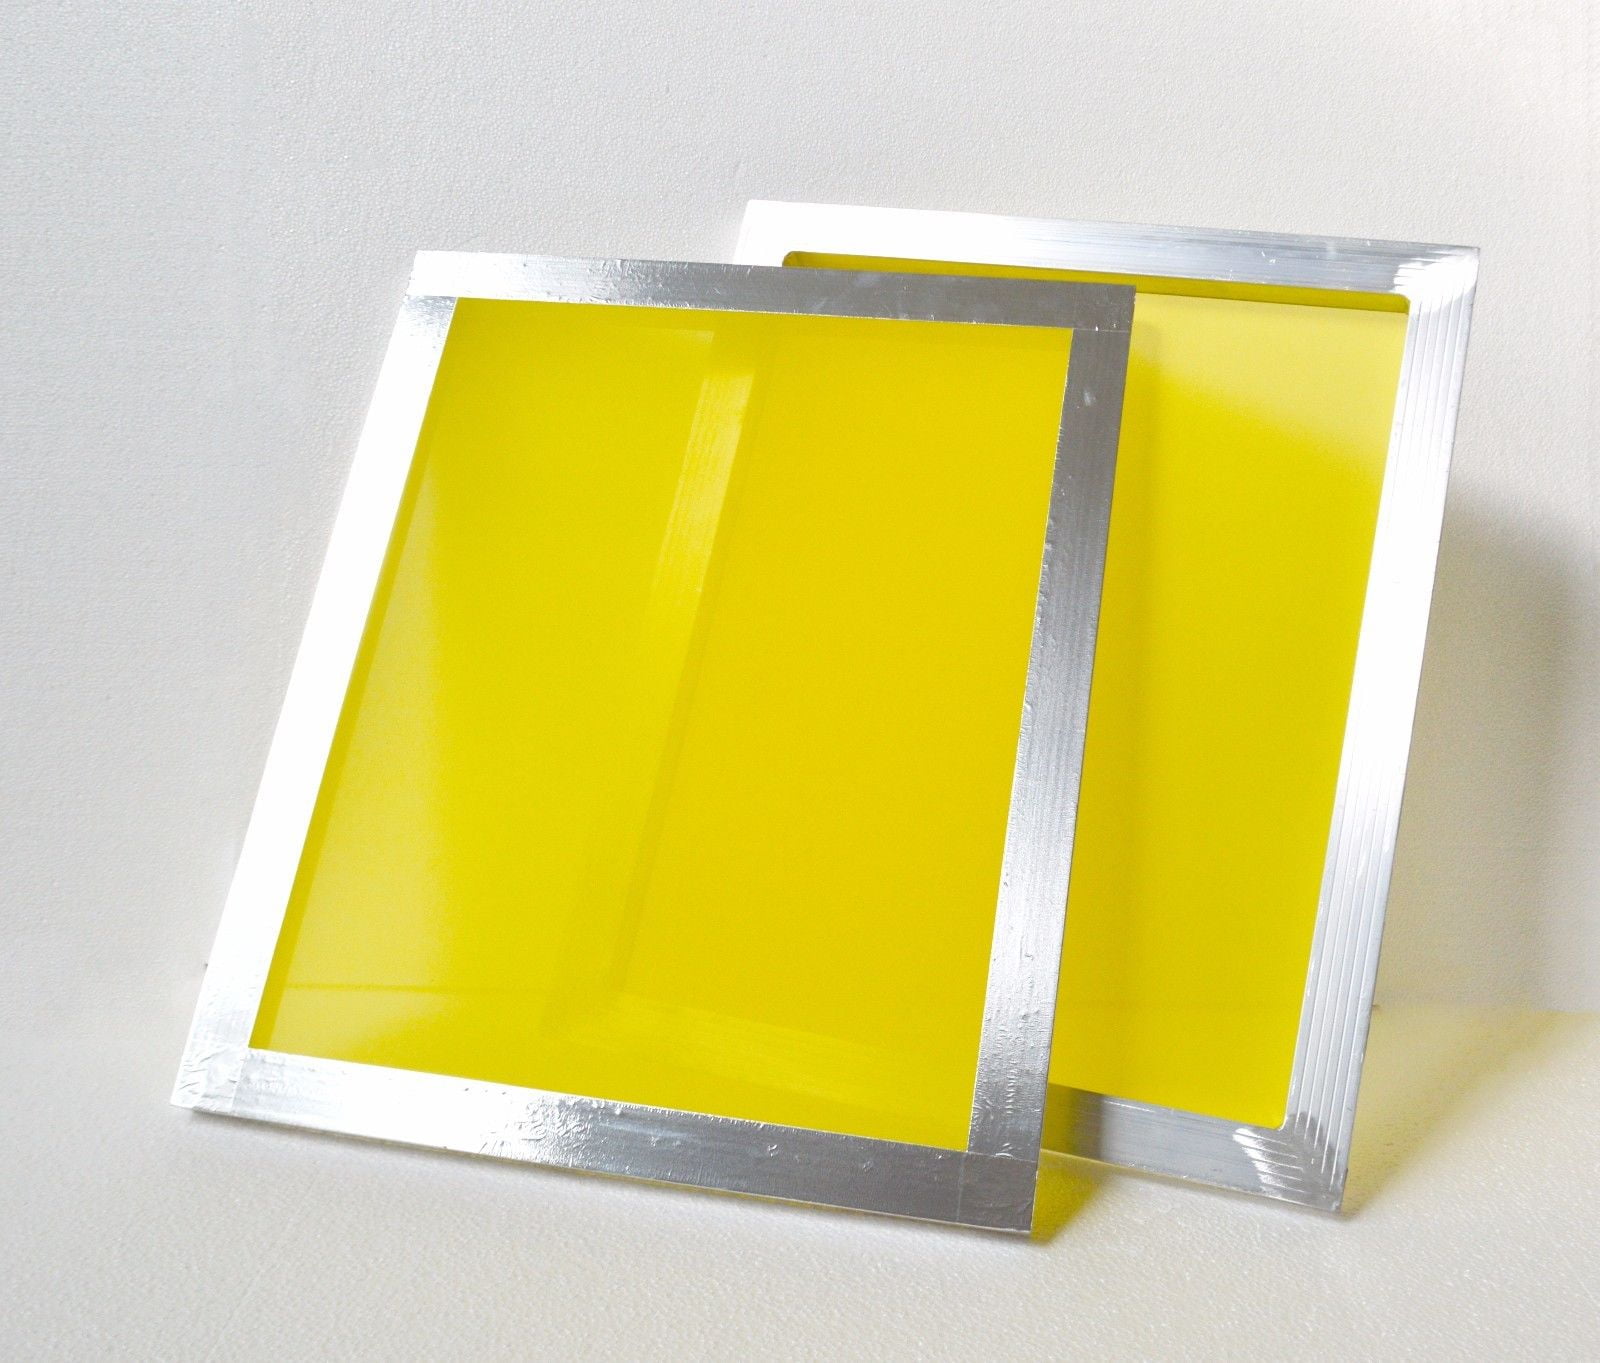 INTBUYING 6Pcs 23x31 Screen Printing Frame Mesh Pre-Stretched Aluminum Internal Size 20x28inches Yellow Mesh 230 100T 